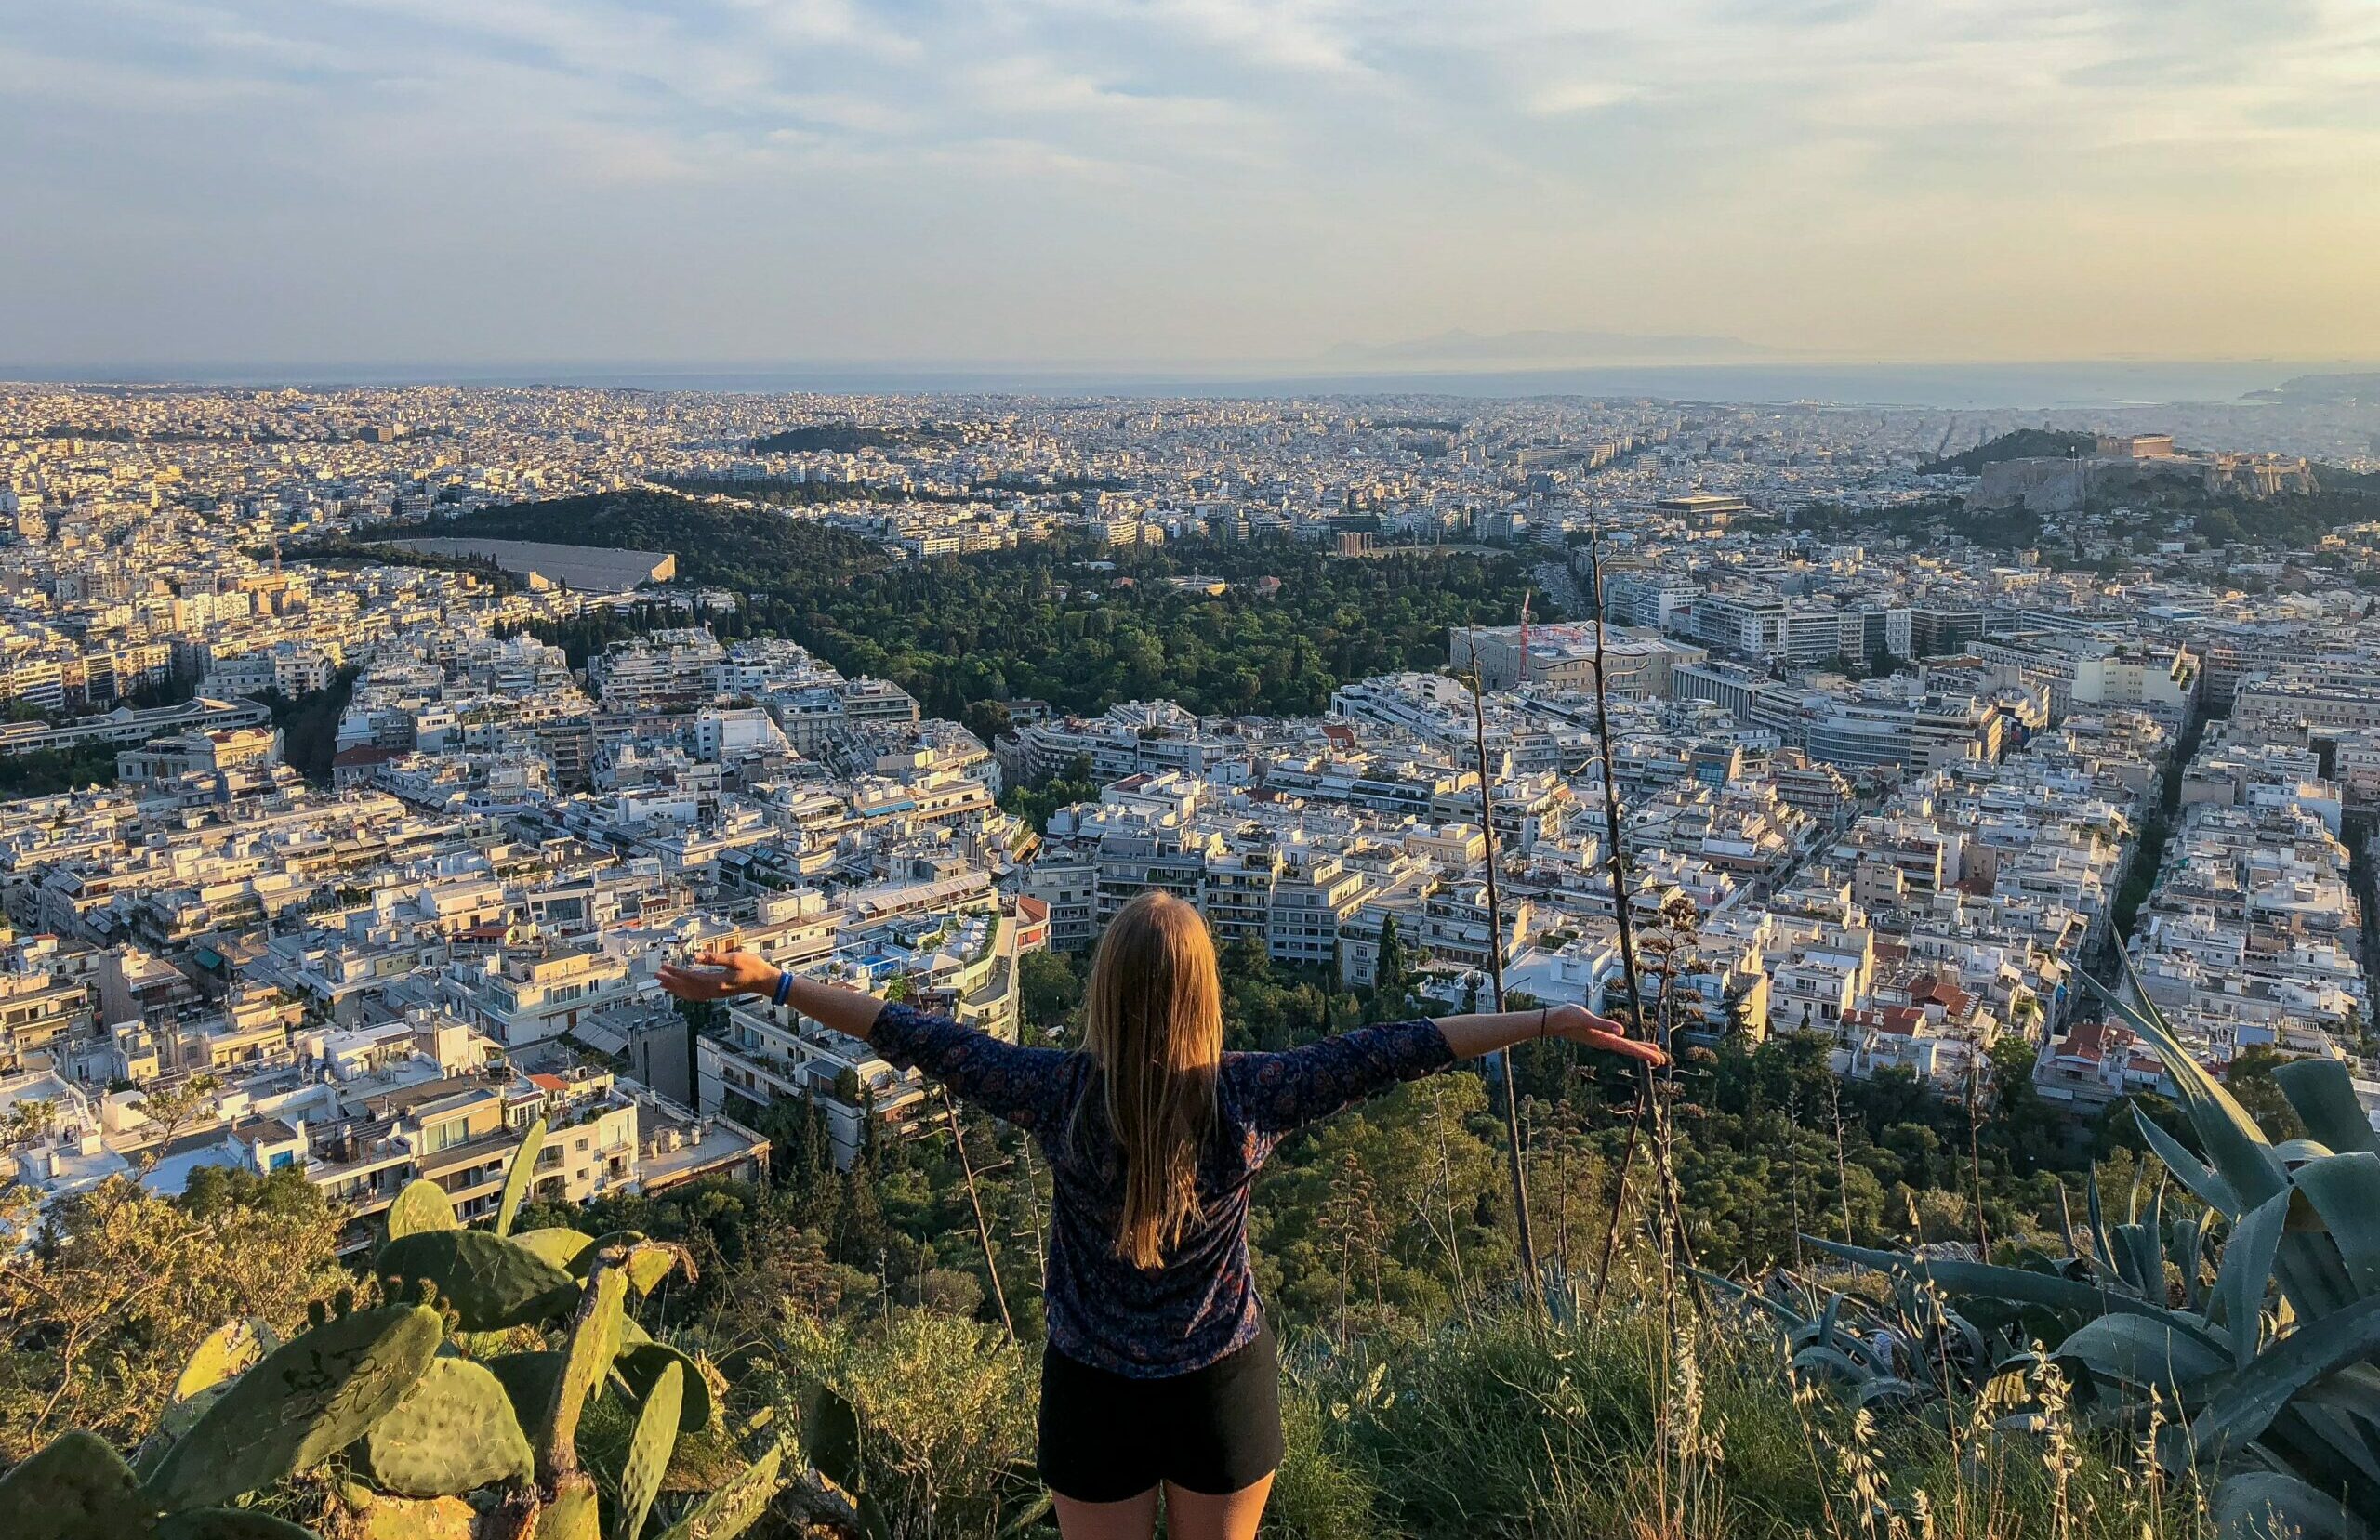 Athens: its place among the world’s 500 most innovative cities